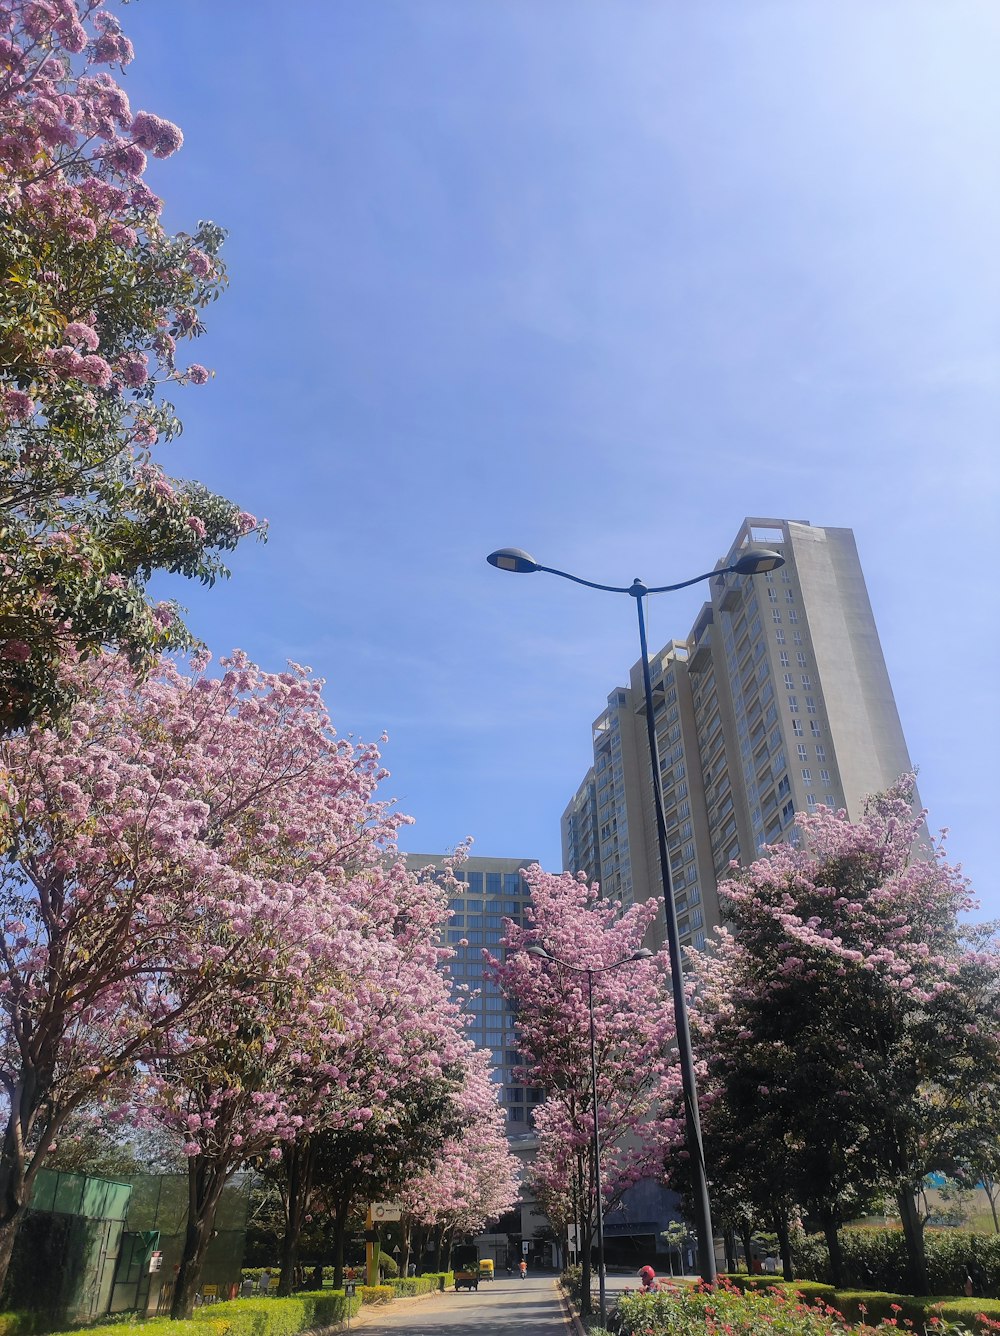 a city street lined with blooming trees next to tall buildings